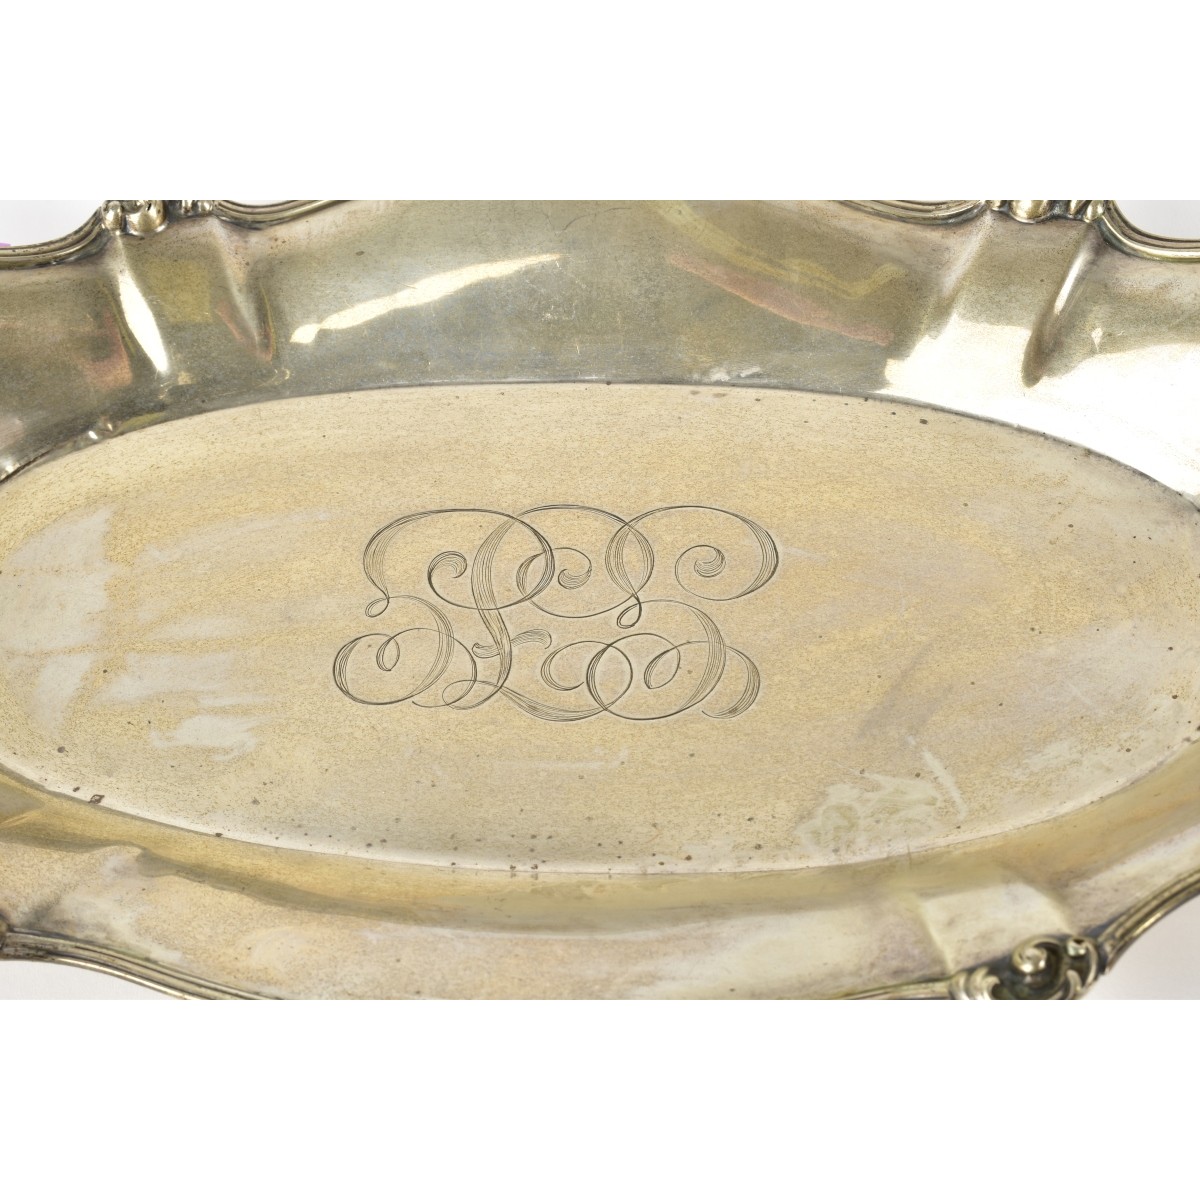 Barbour Sterling Oval Tray